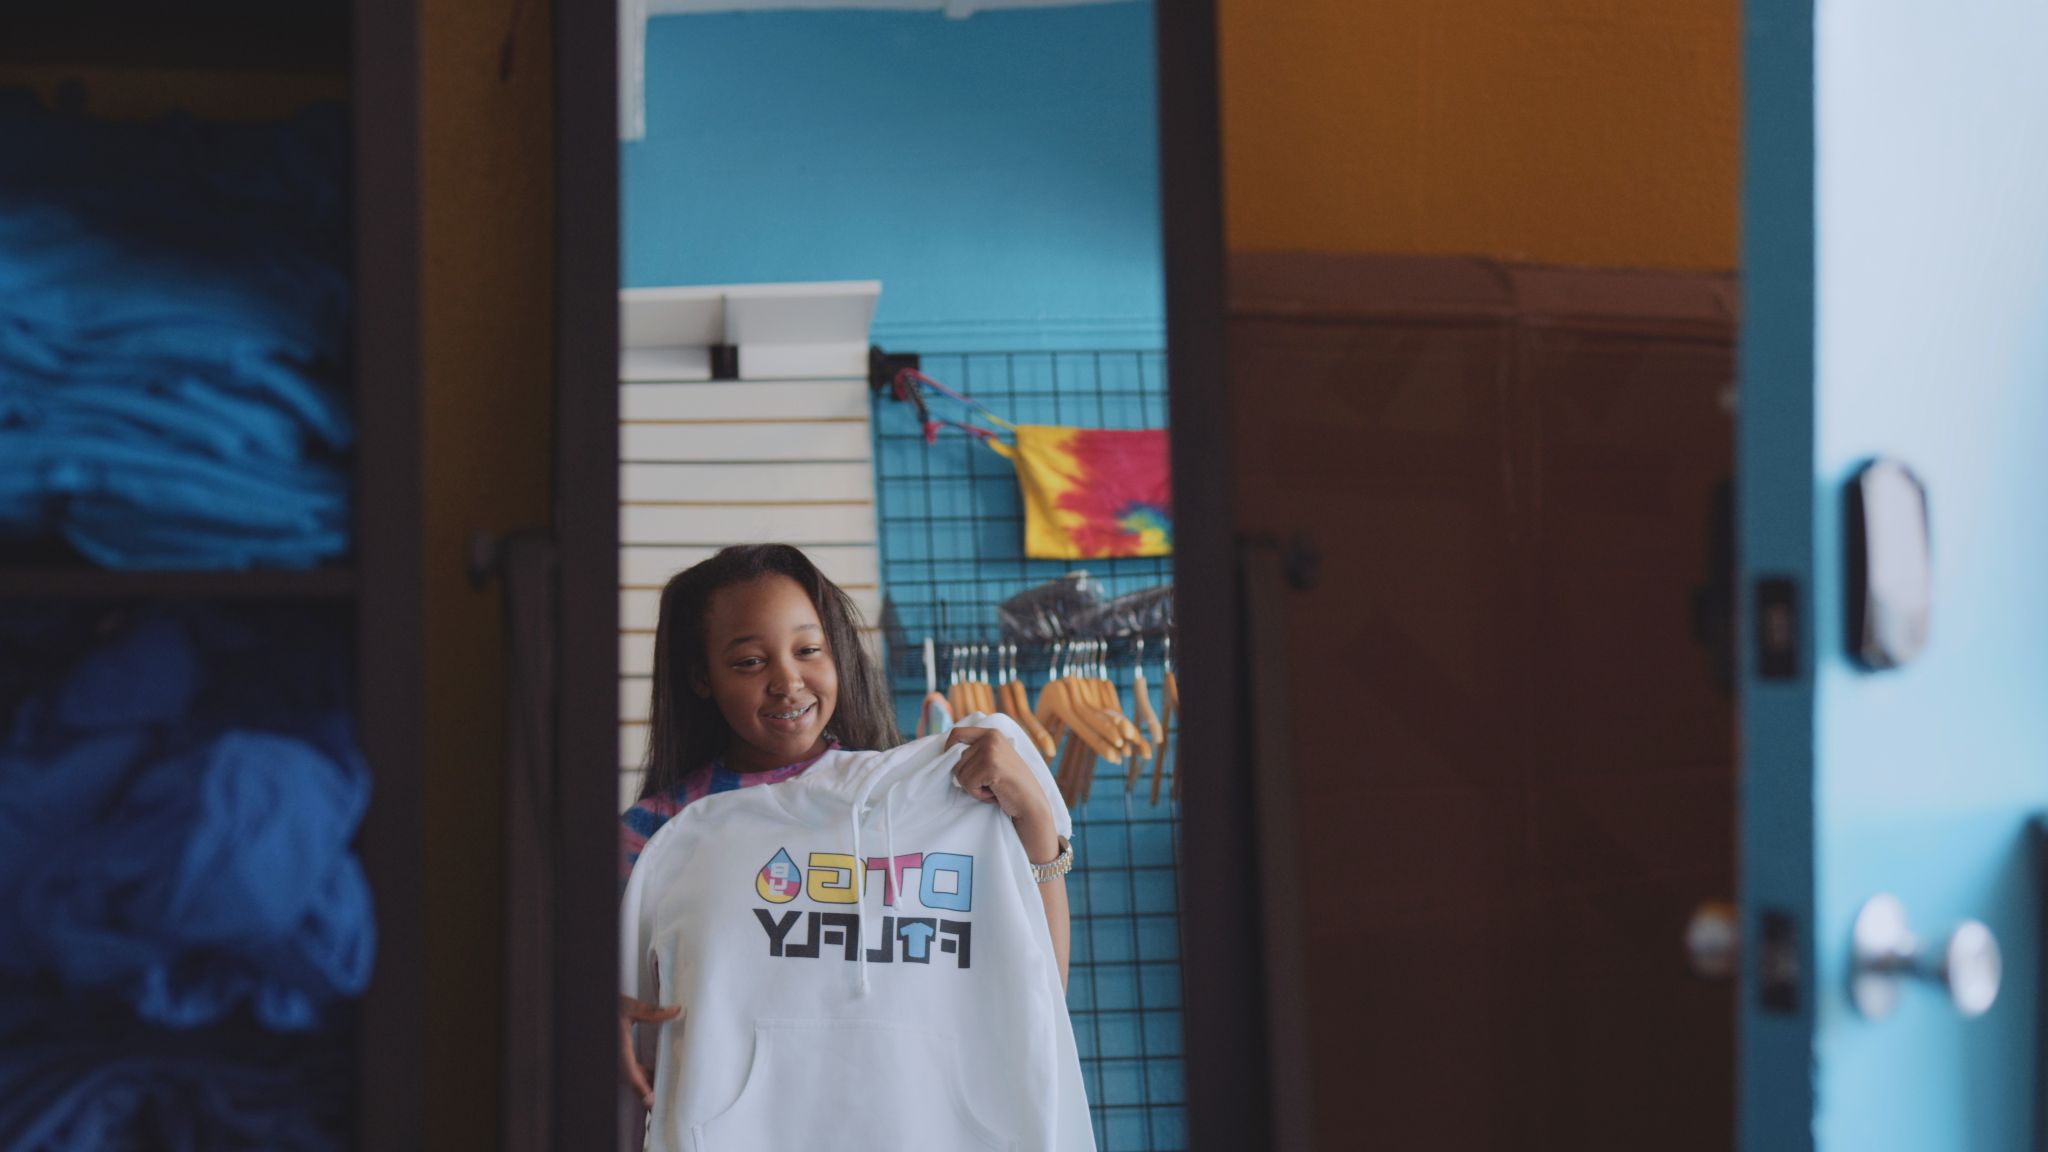 Girl holding a white sweatshirt with logo looking in a mirror smiling